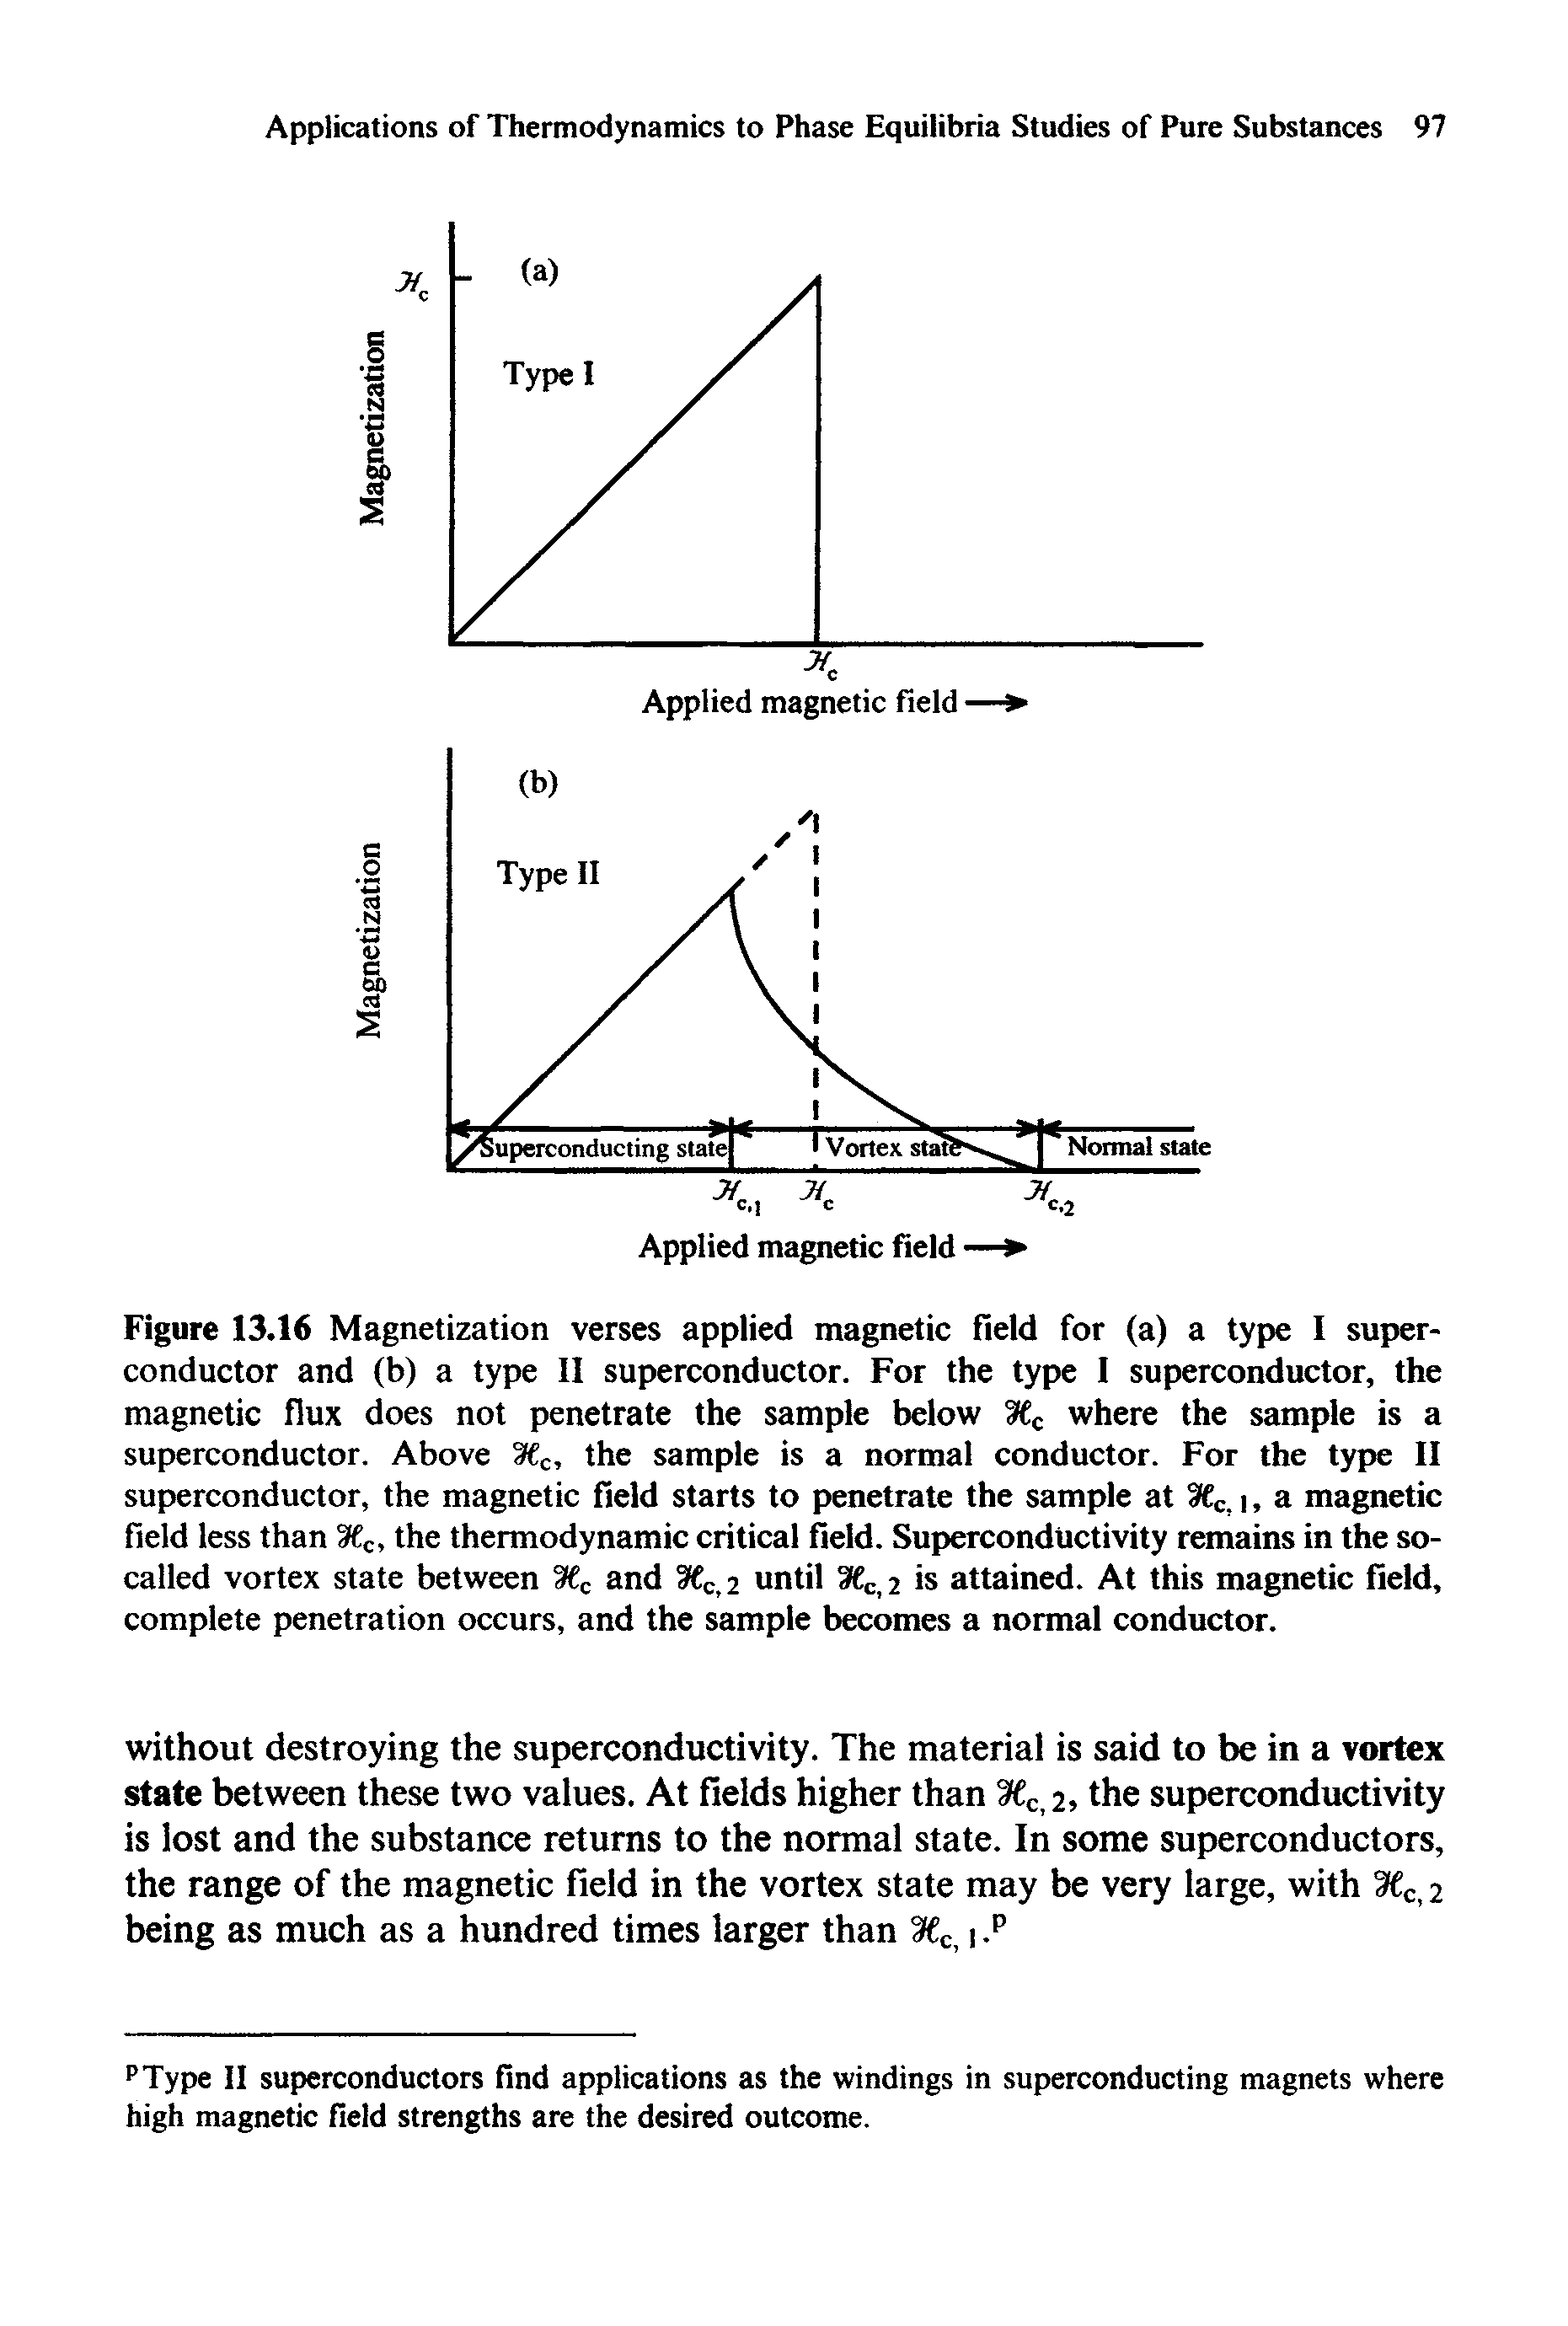 Figure 13.16 Magnetization verses applied magnetic field for (a) a type I superconductor and (b) a type II superconductor. For the type I superconductor, the magnetic flux does not penetrate the sample below 9 Cc where the sample is a superconductor. Above rMc, the sample is a normal conductor. For the type II superconductor, the magnetic field starts to penetrate the sample at 3Cc, 1, a magnetic field less than rXc, the thermodynamic critical field. Superconductivity remains in the so-called vortex state between 9 c and Ci2 until WCt2 is attained. At this magnetic field, complete penetration occurs, and the sample becomes a normal conductor.